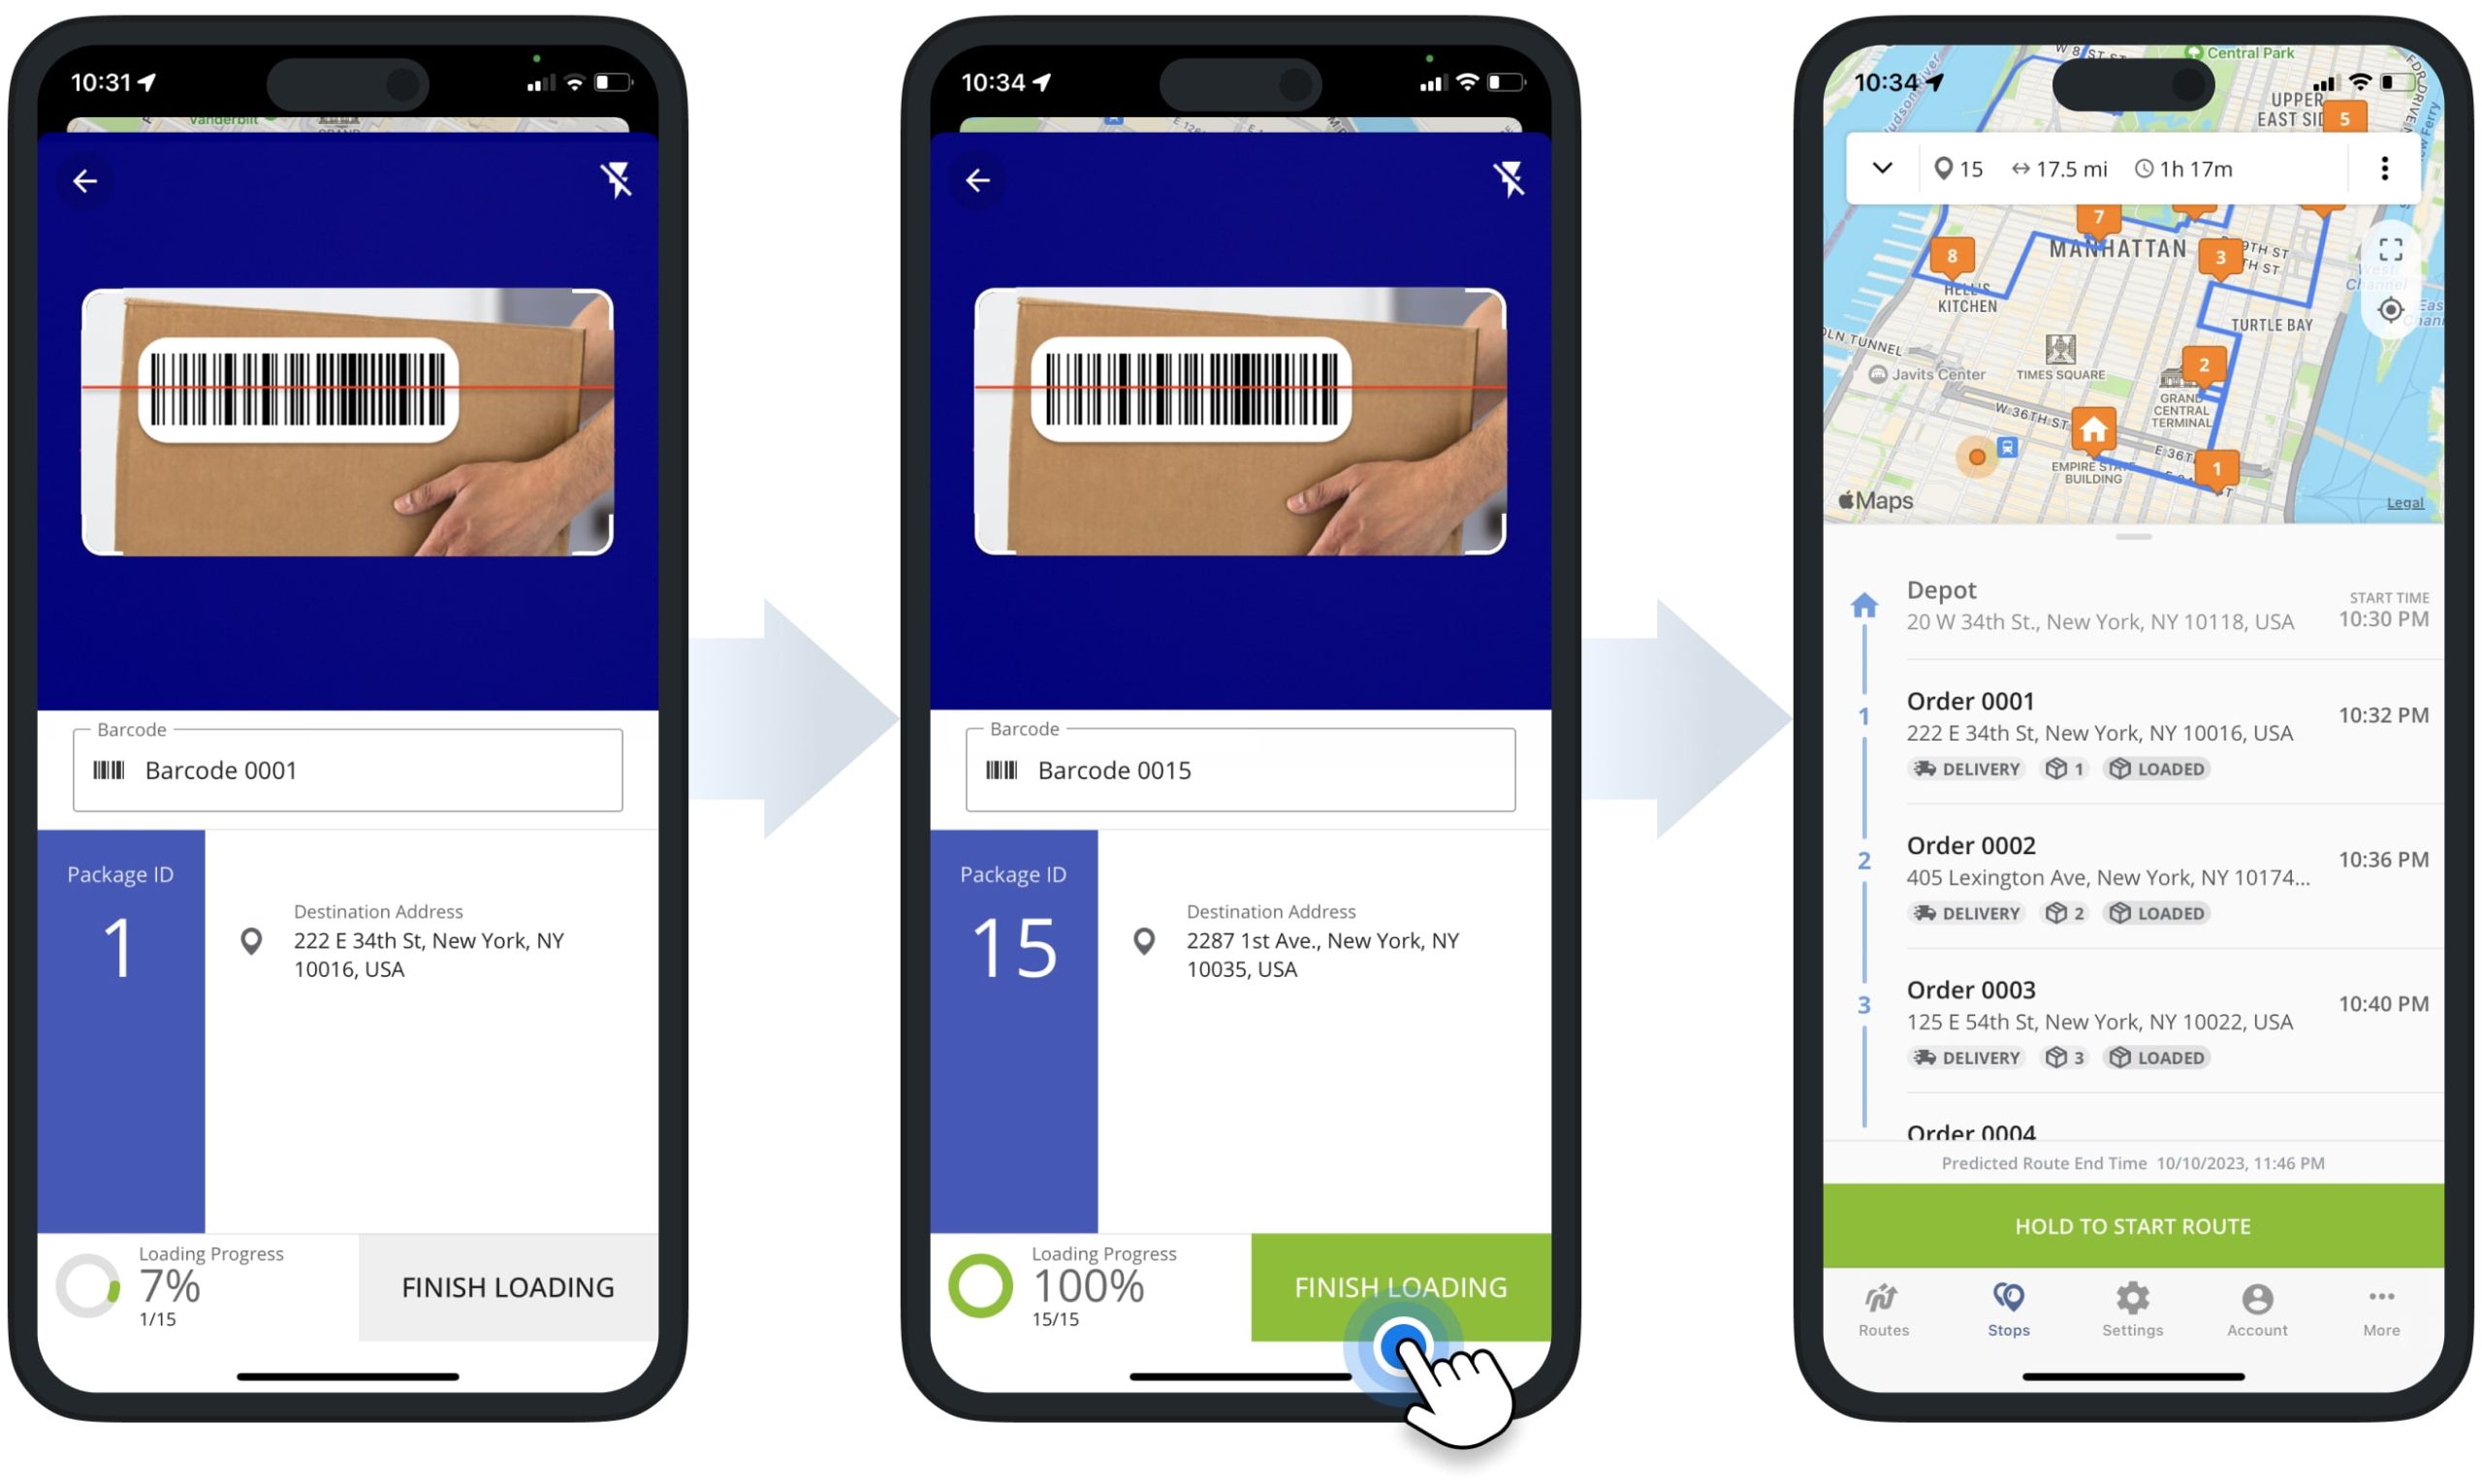 Load orders on the delivery route vehicle by scanning barcodes on packages using the barcode scanner.